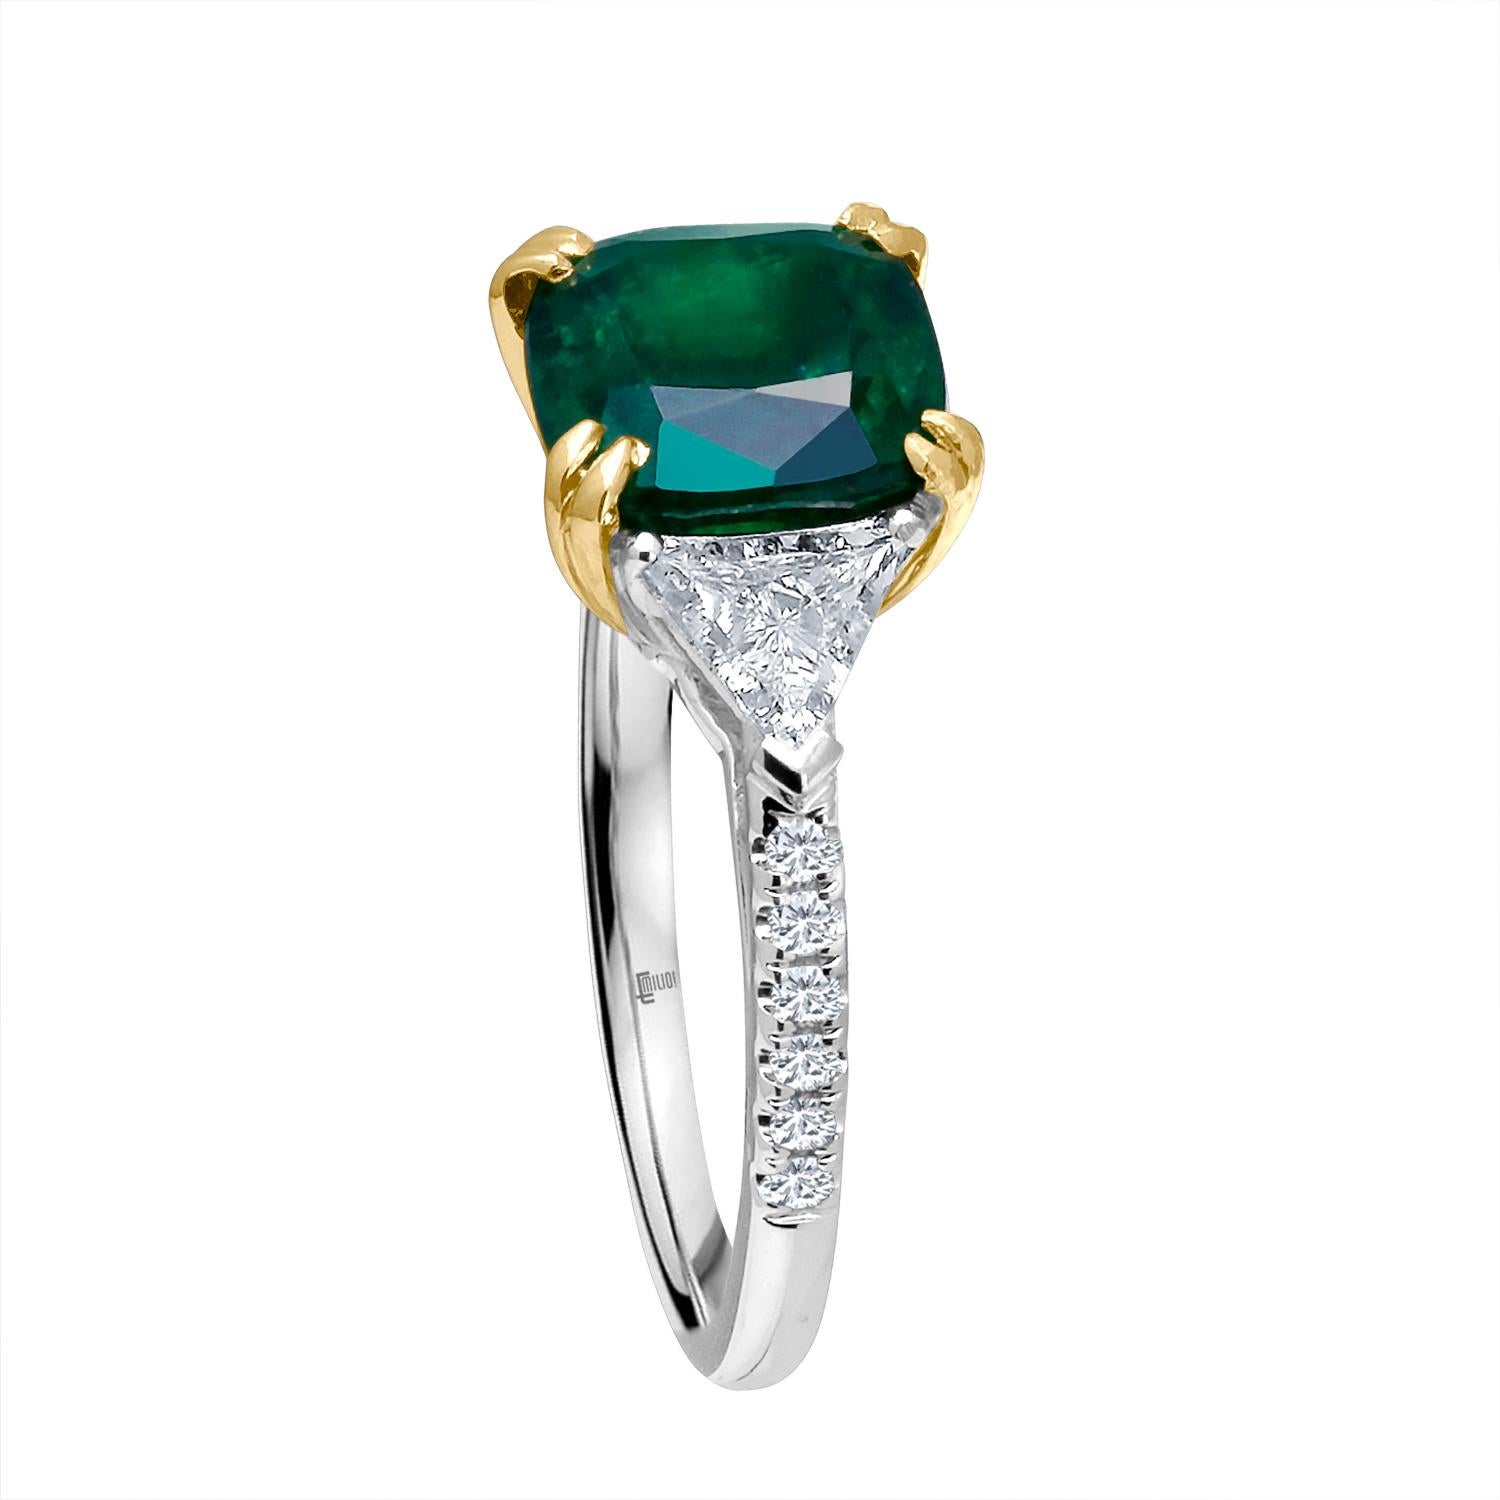 Hand made in the Emilio Jewelry Factory, A gorgeous deep green Certified Emerald cut Zambian Genuine Emerald 3.63 Carats set in the center. The emerald is very clean and completely eye clean. Center Emerald Dimensions: 8.90x8.90mm
The Side diamonds